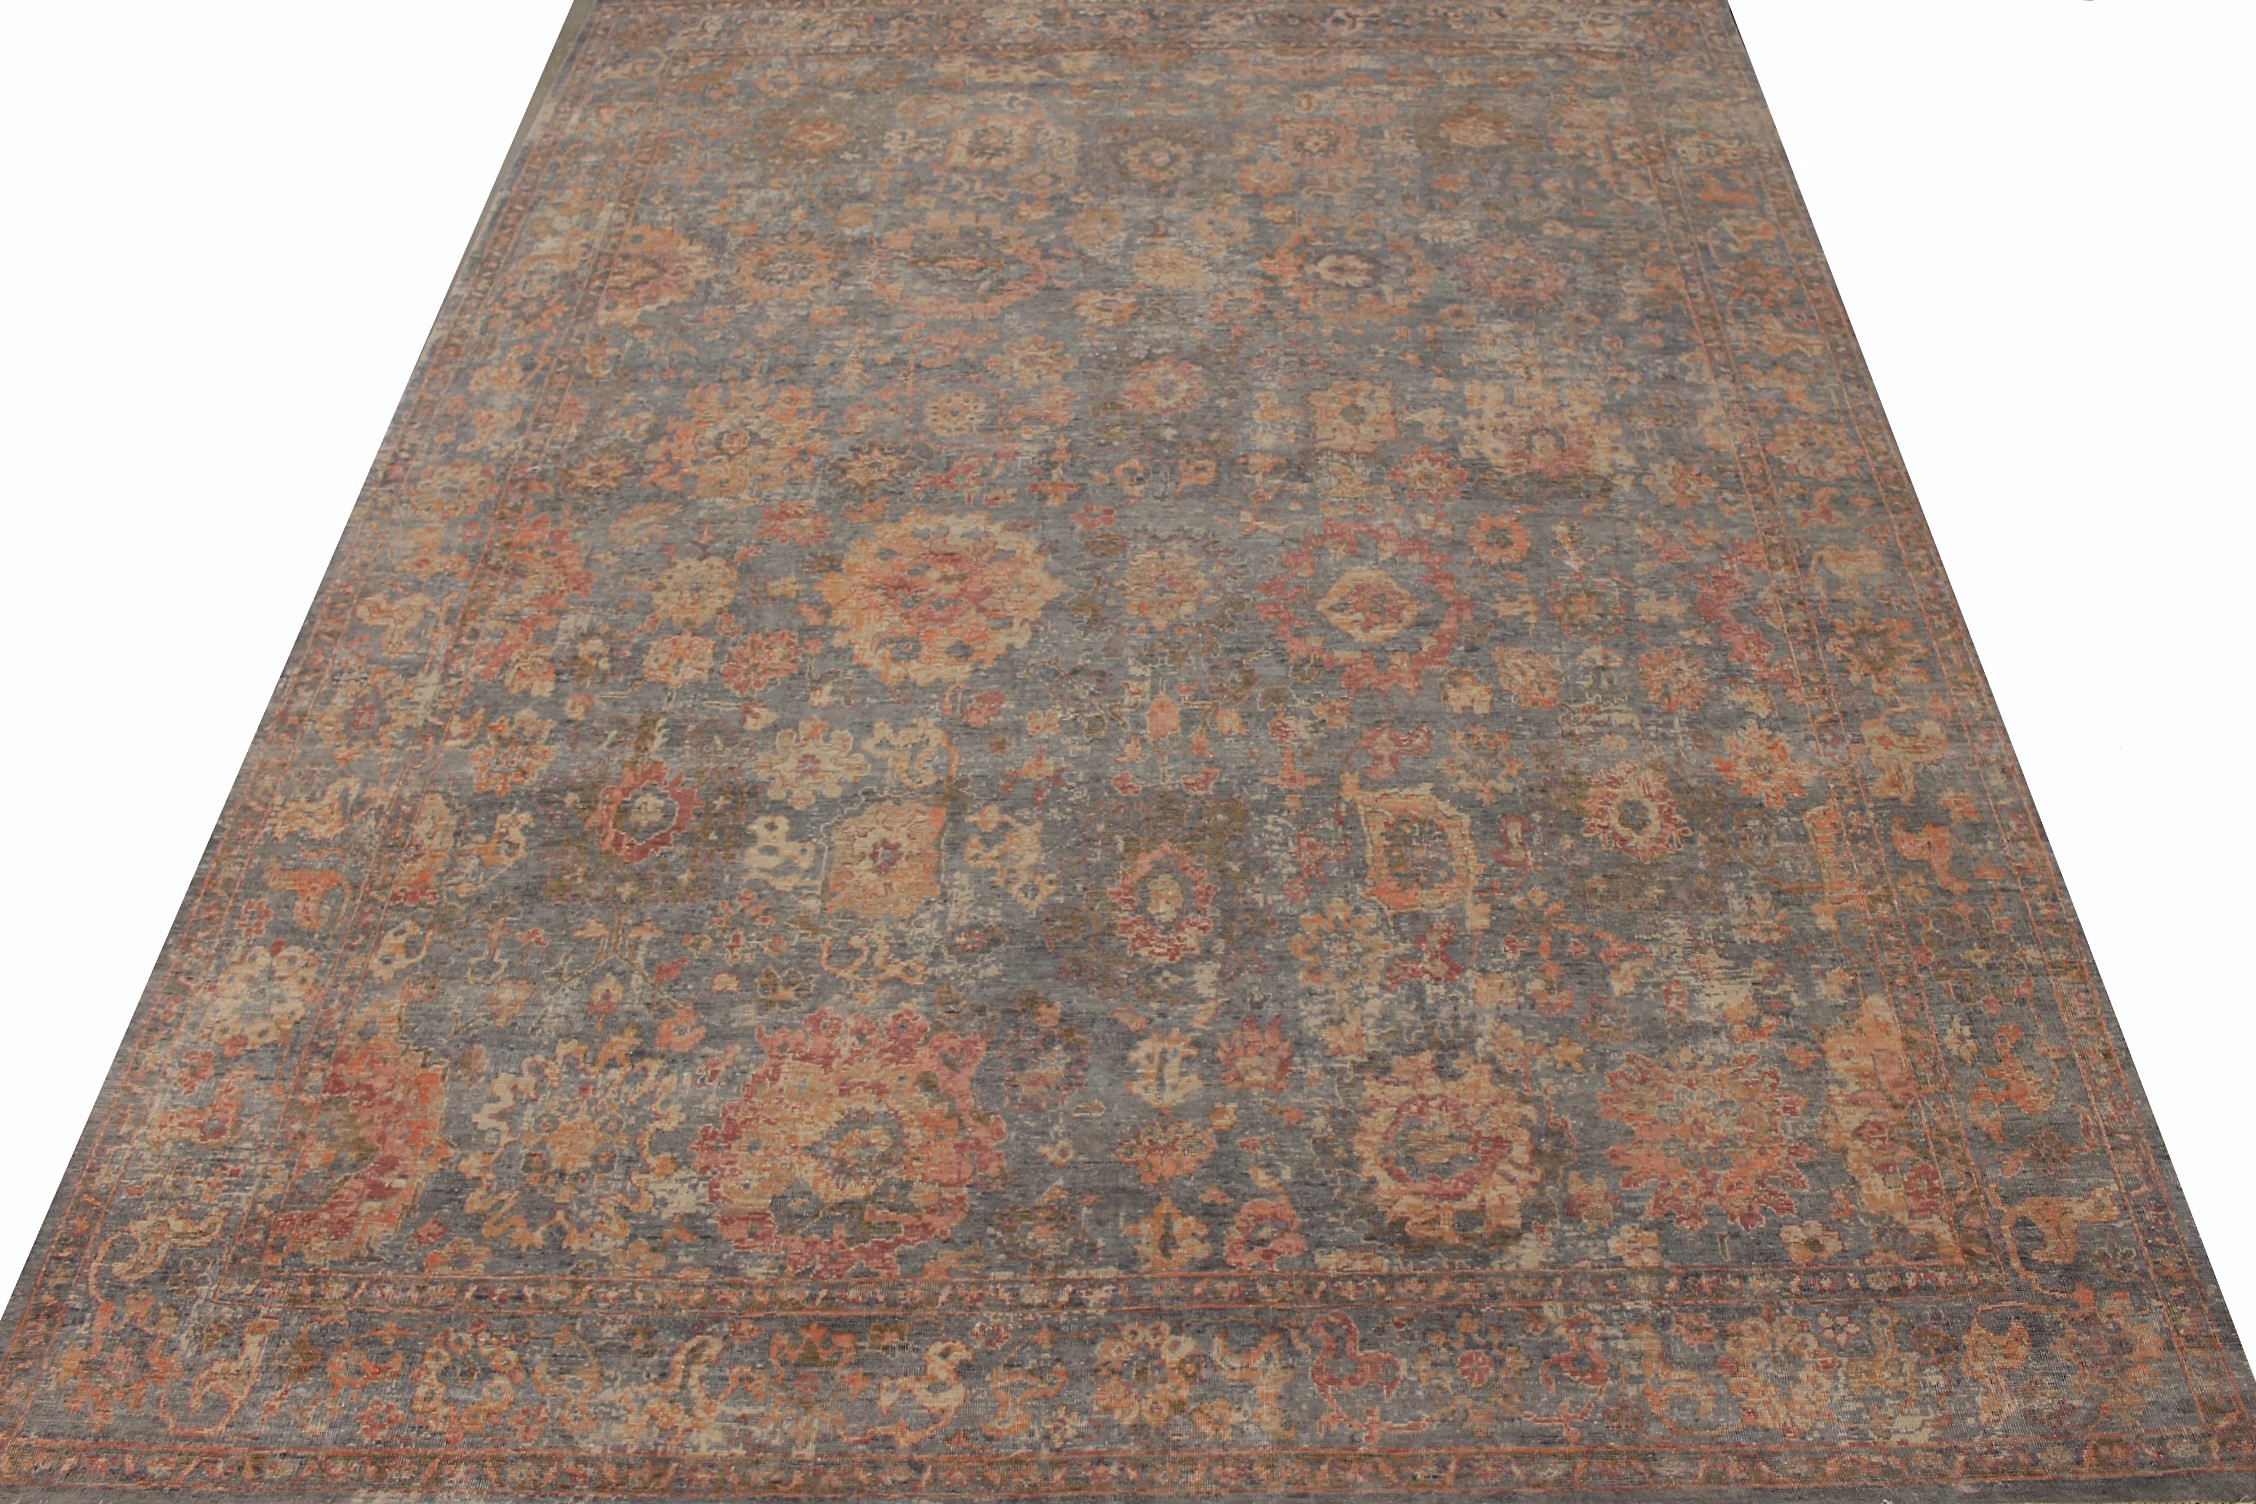 9x12 Aryana & Antique Revivals Hand Knotted Wool Area Rug - MR027424